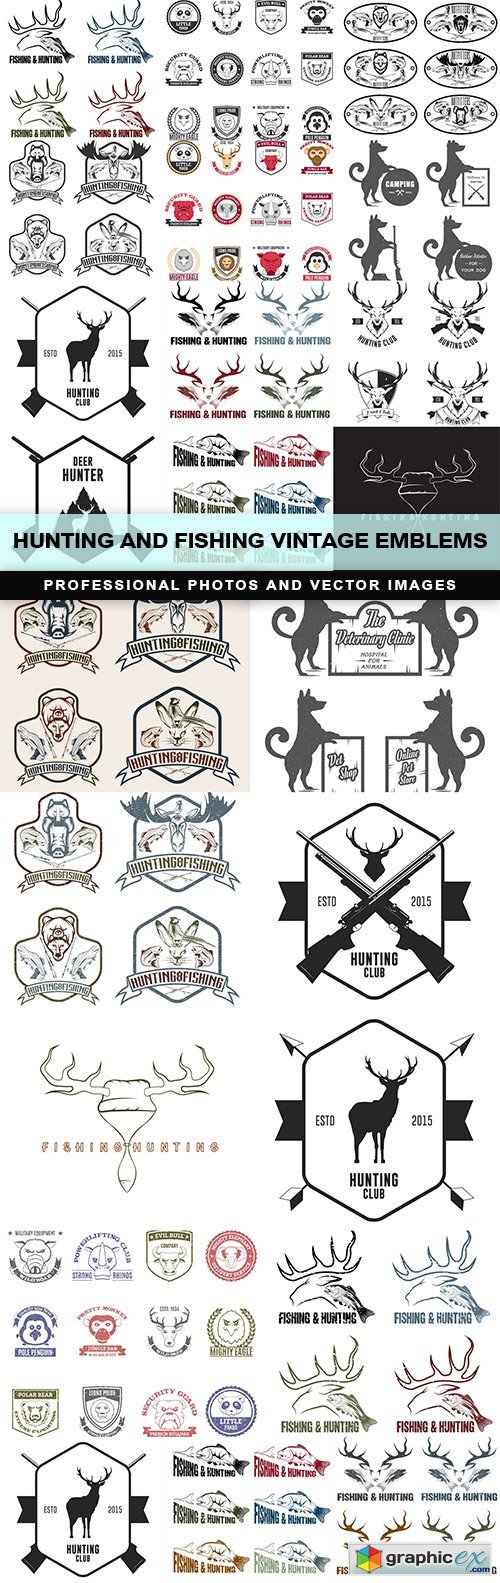 Hunting and fishing vintage emblems